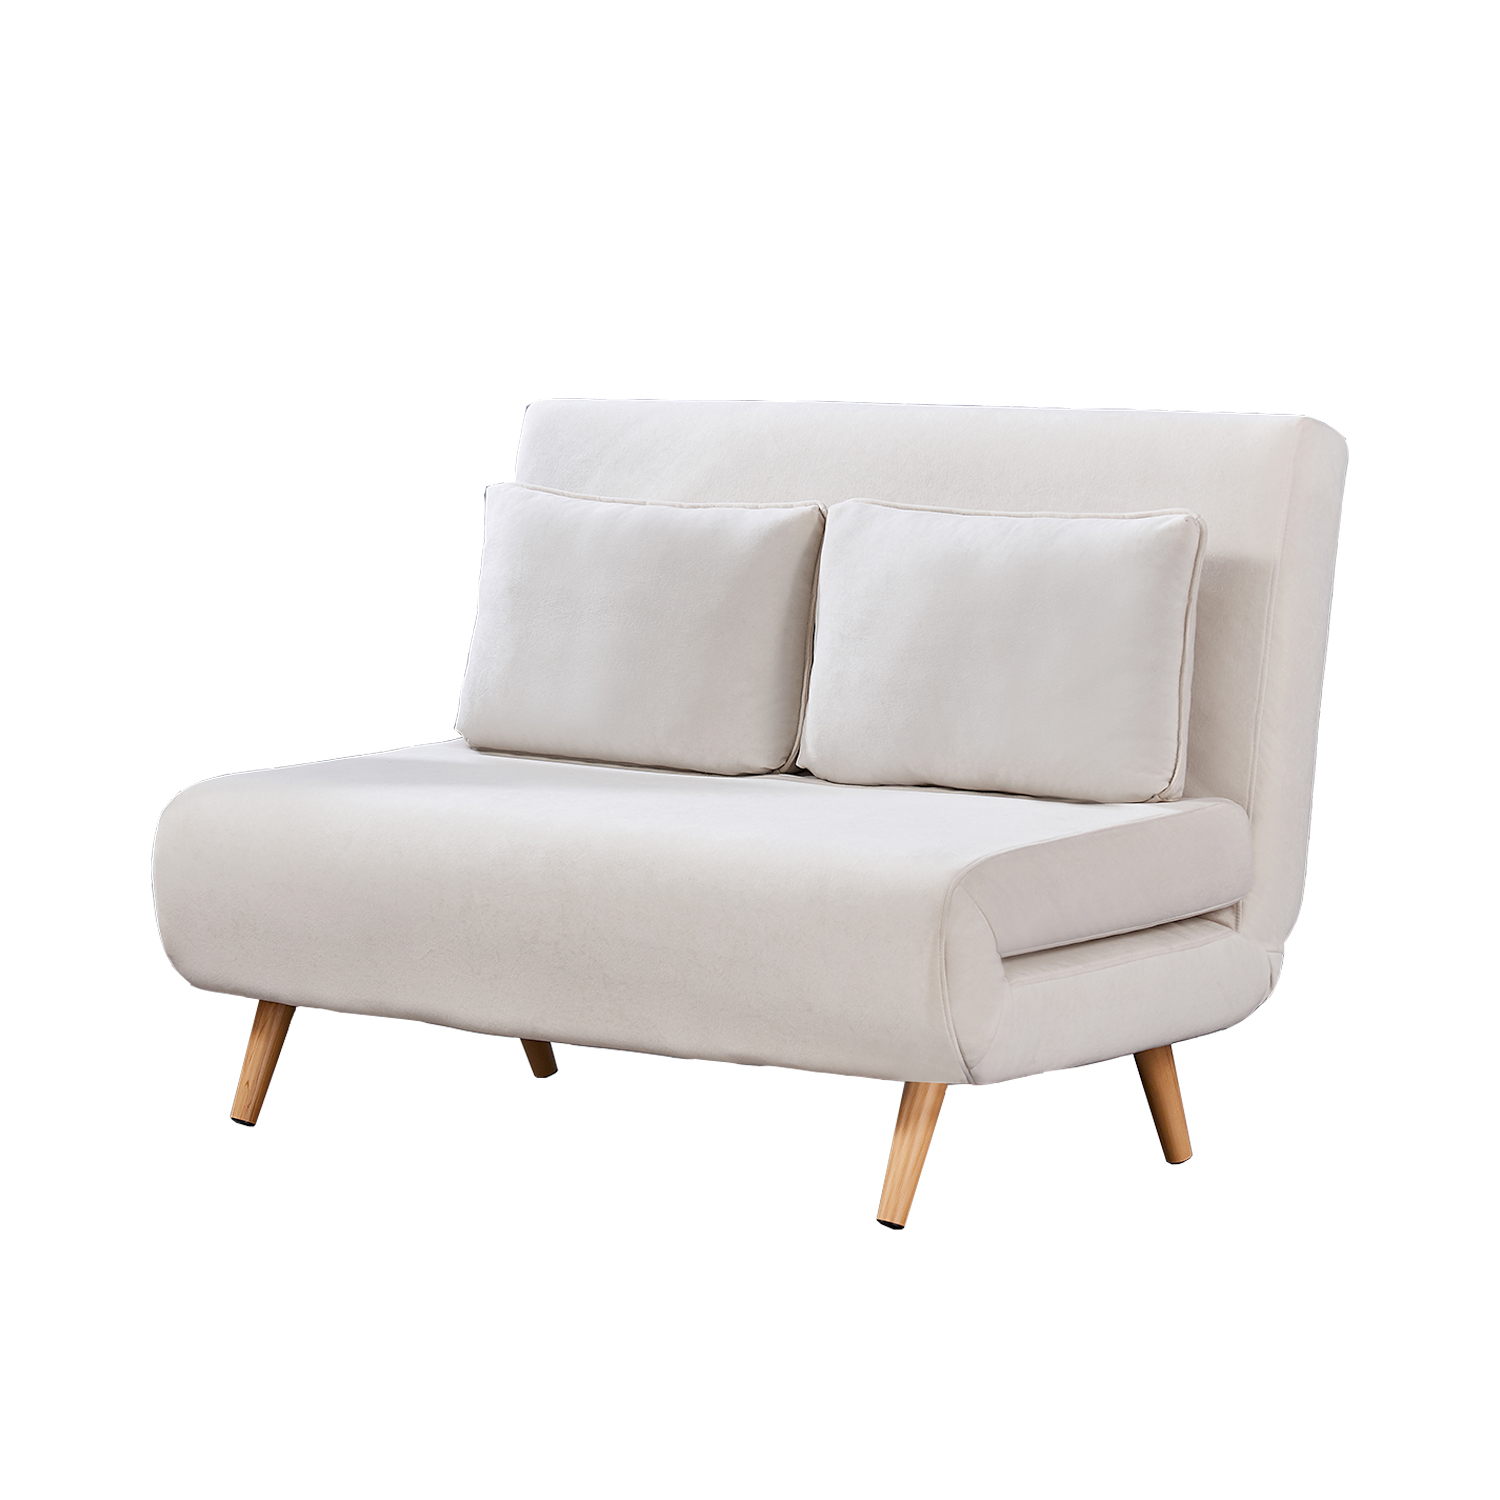 Millie Wood 2 Seater Sofabed White